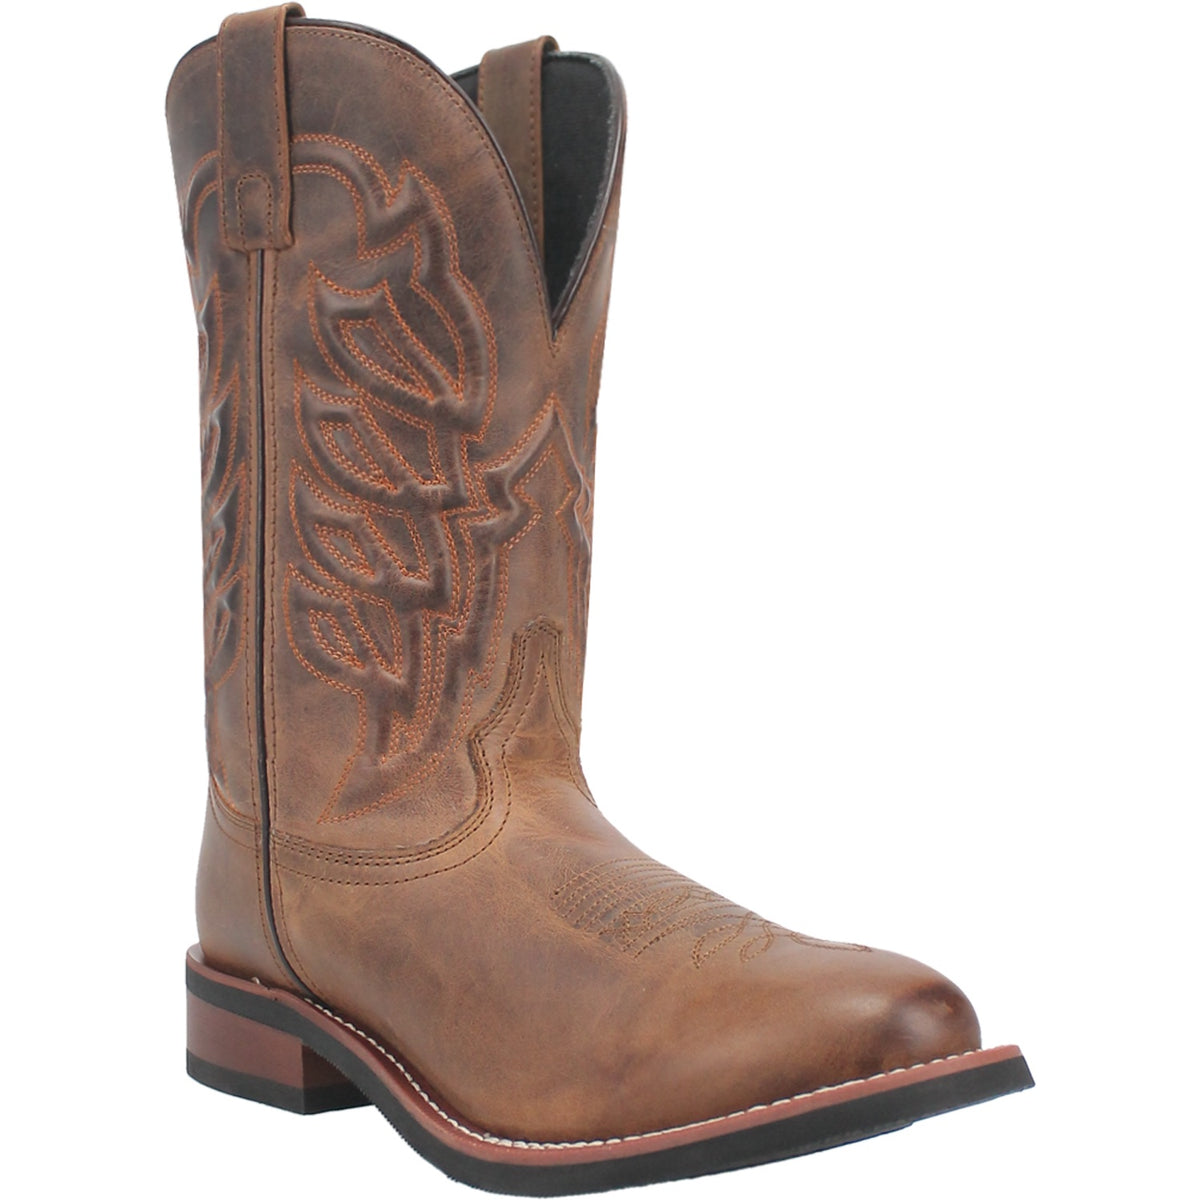 COMBS LEATHER BOOT Cover